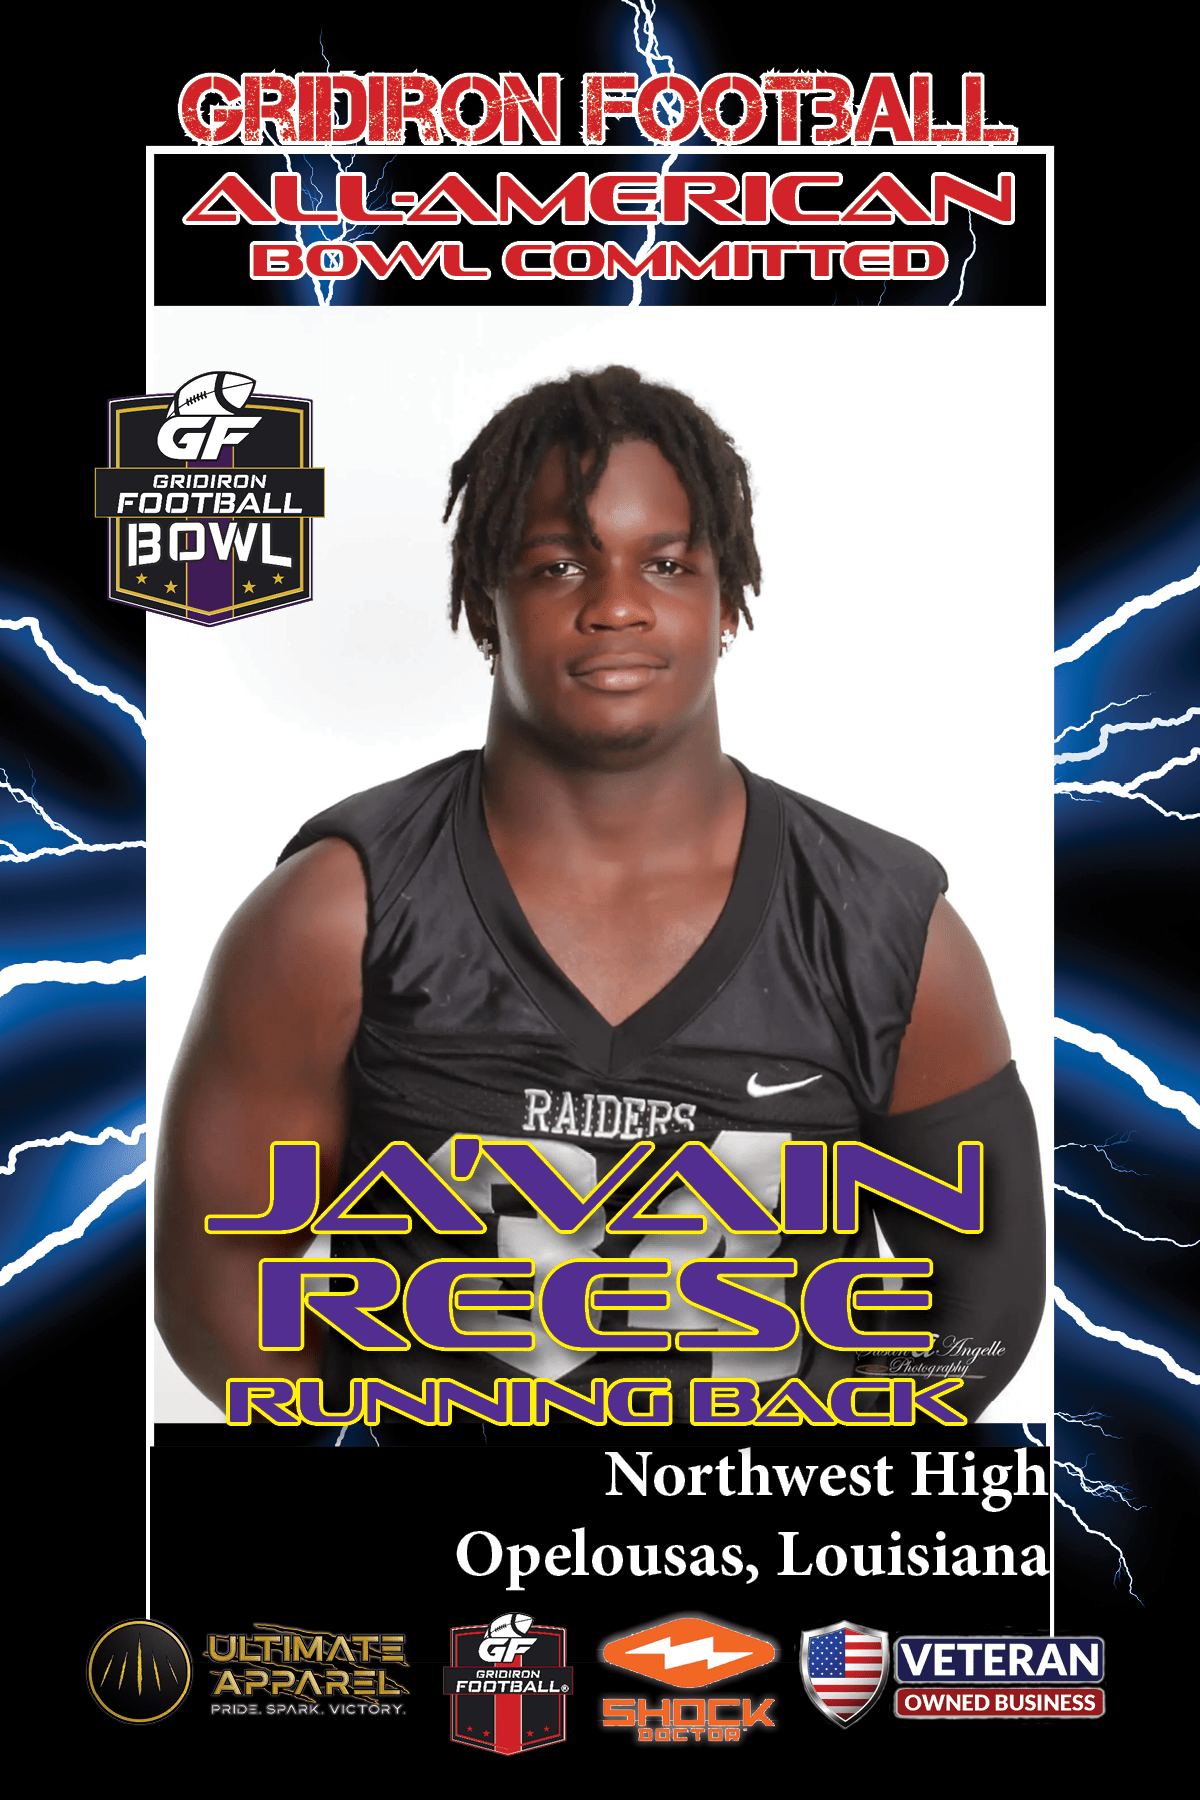 BREAKING NEWS: Northwest High School (Opelousas, LA) RB Ja’Vain Reese Commits To The Gridiron Football All-American Bowl Game